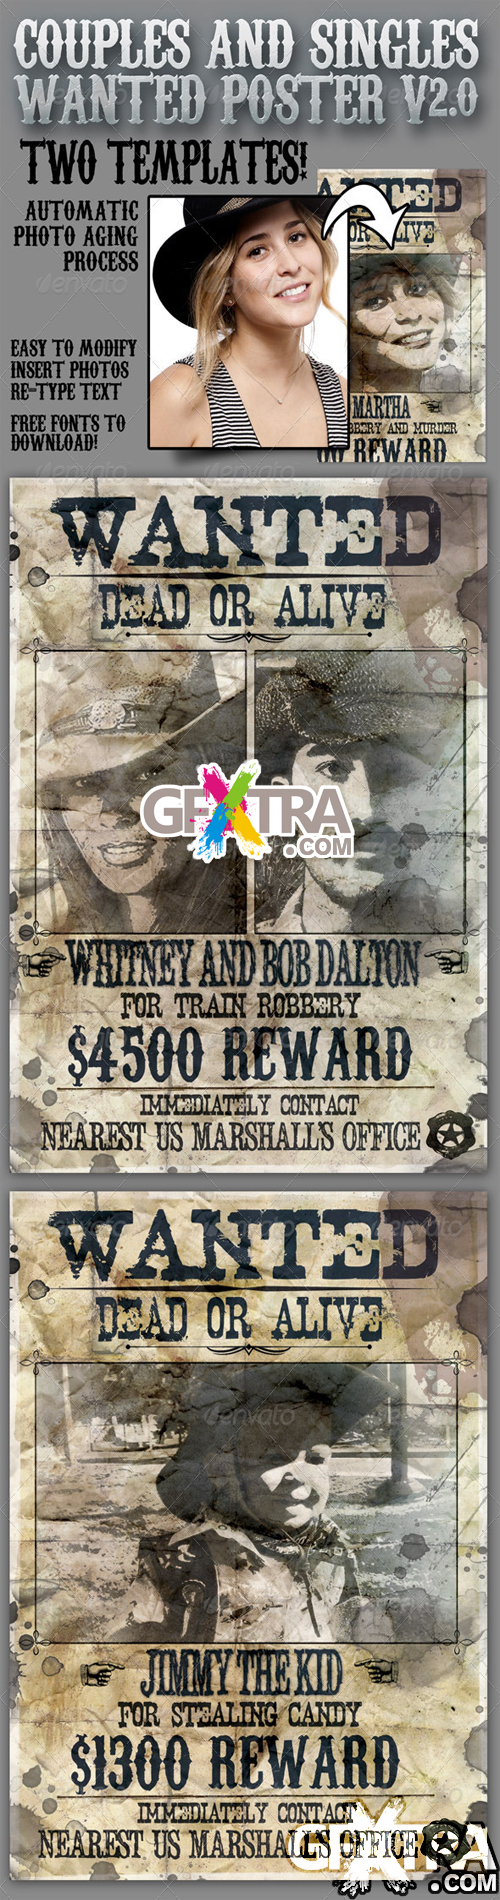 GraphicRiver - Wanted Poster 8.5x11 for Singles and Couples V2.0